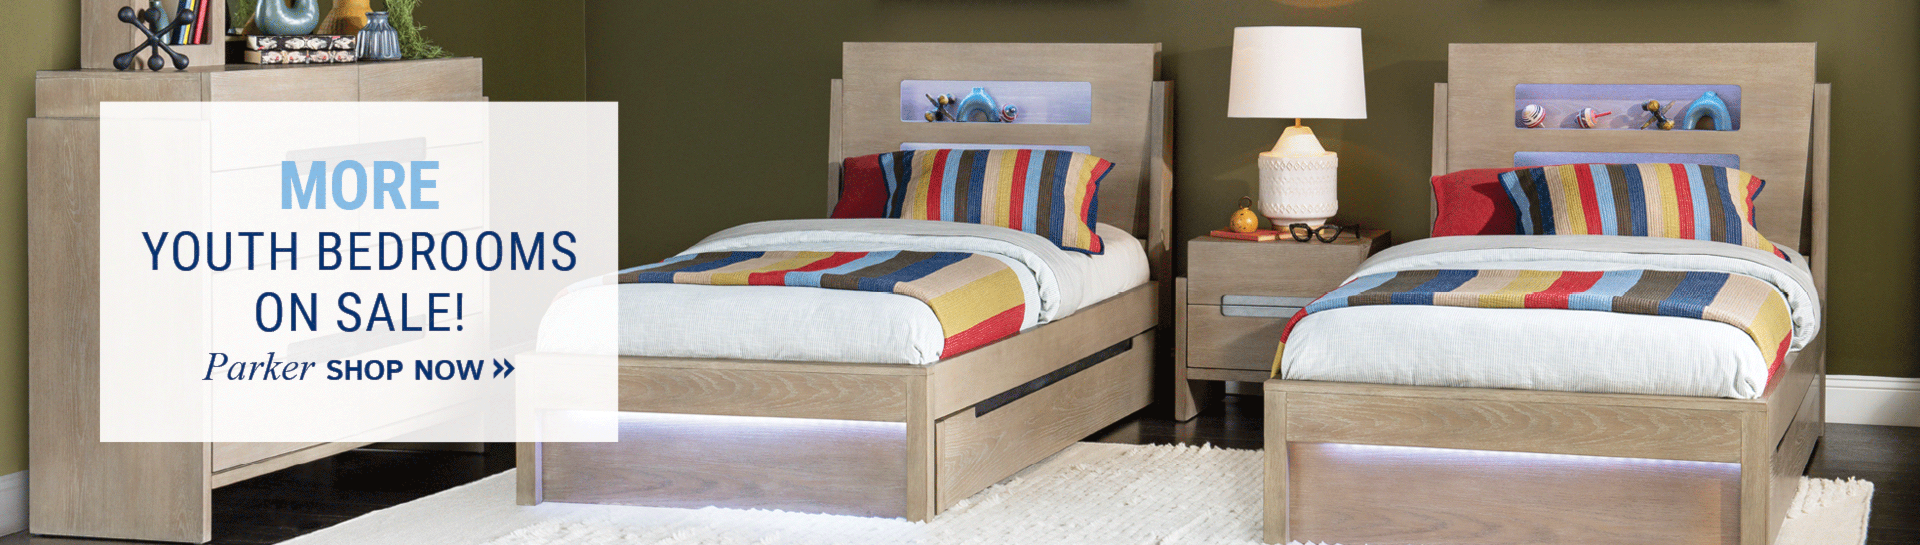 MORE Youth Bedrooms on Sale! Shop Now.